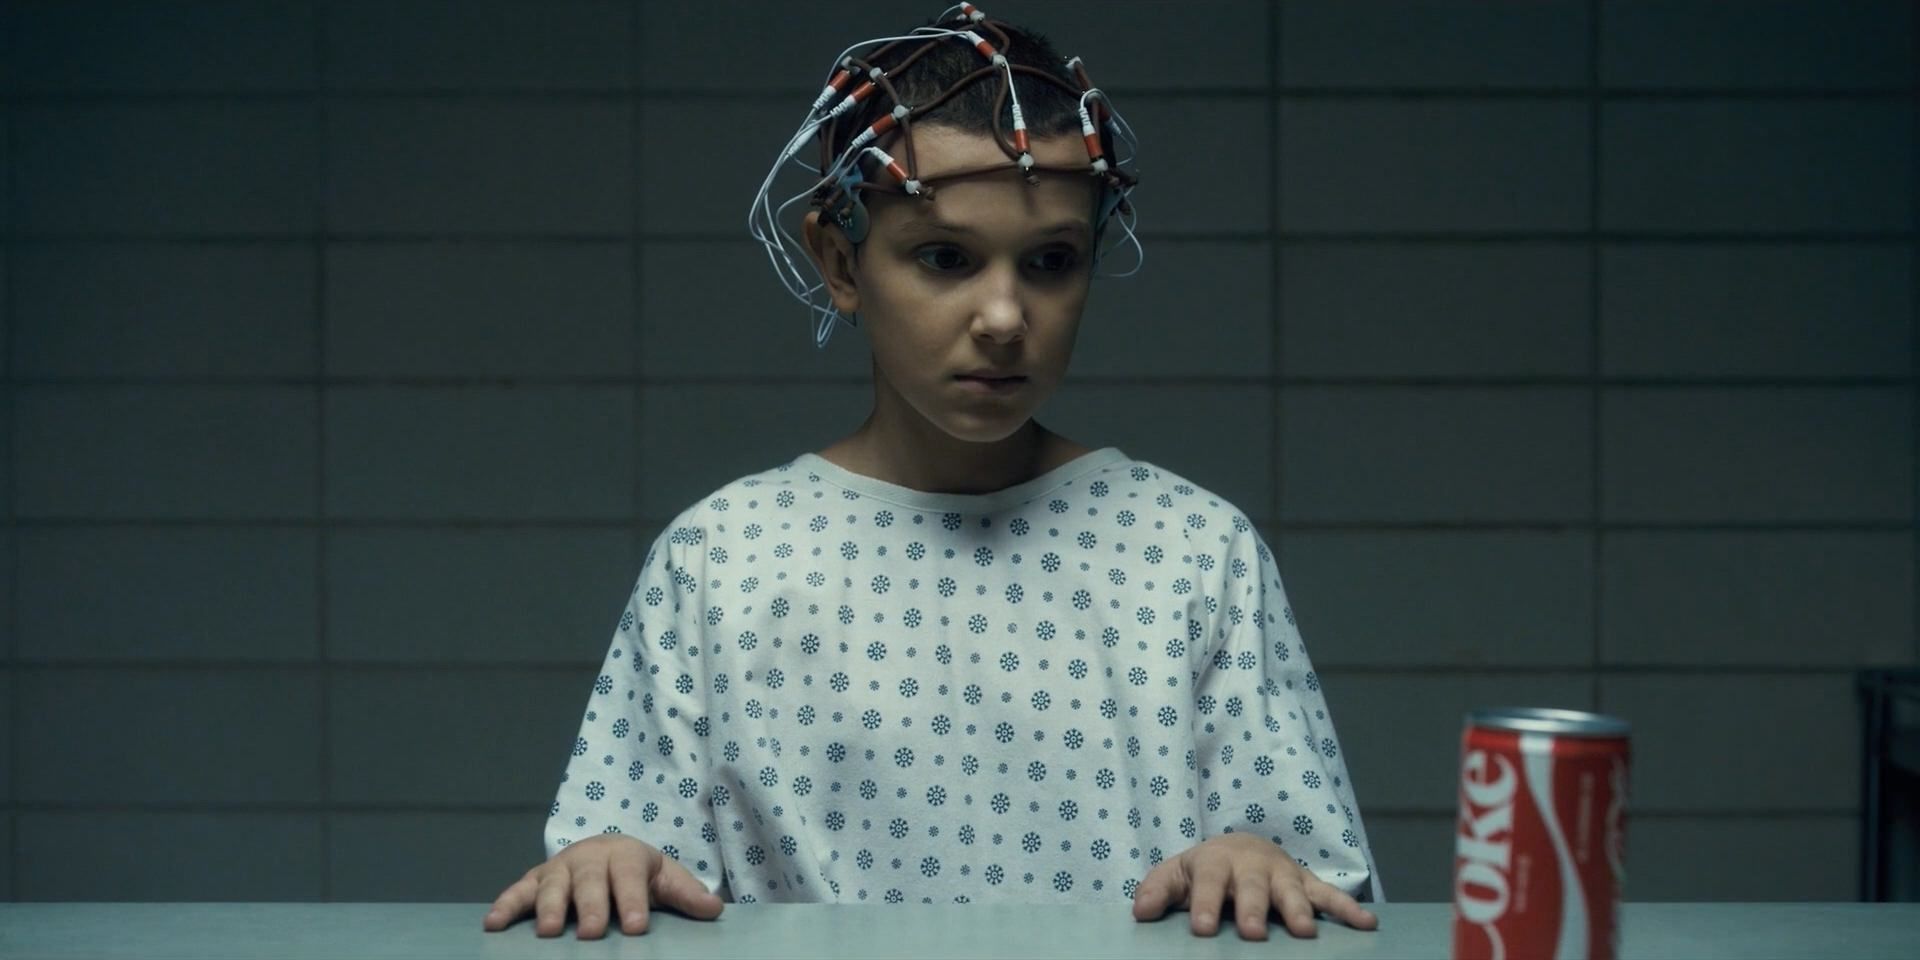 Millie Bobbie Brown as Eleven Wired Up at Hawkins Lab in Stranger Things